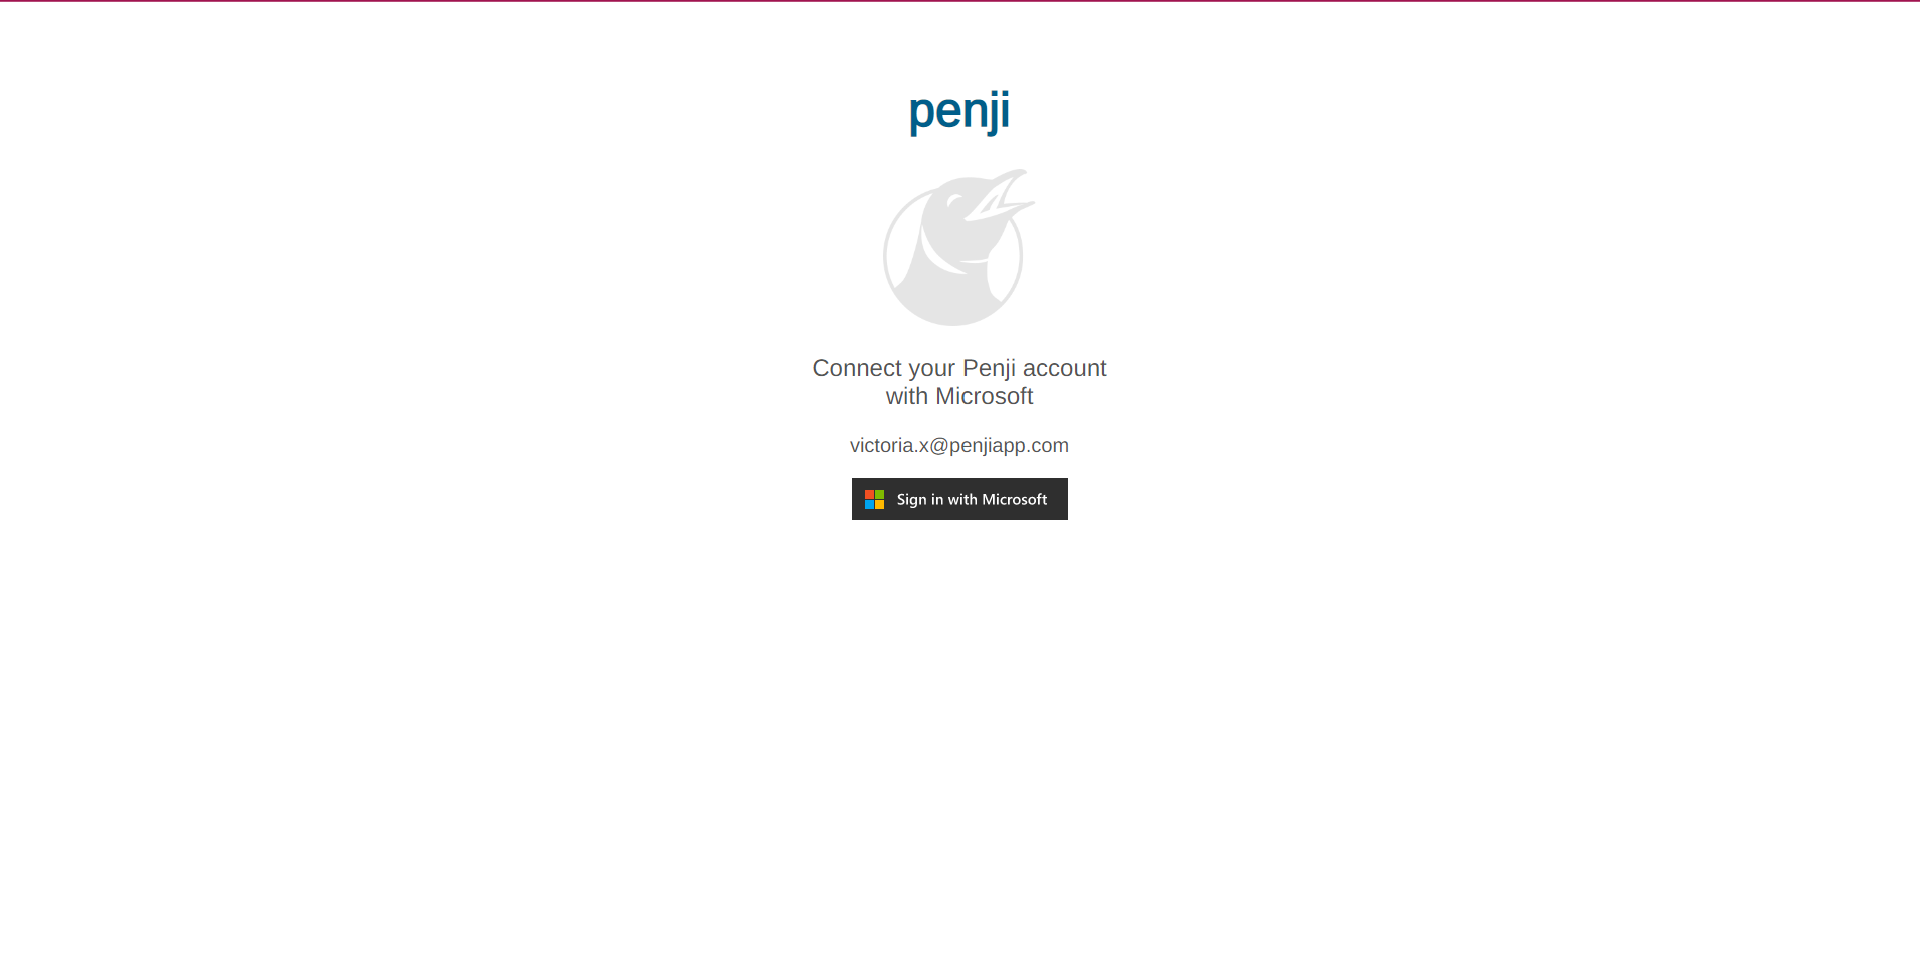 OL_cal_article-_connect_penji_acc_email_to_MS_screen_4.png